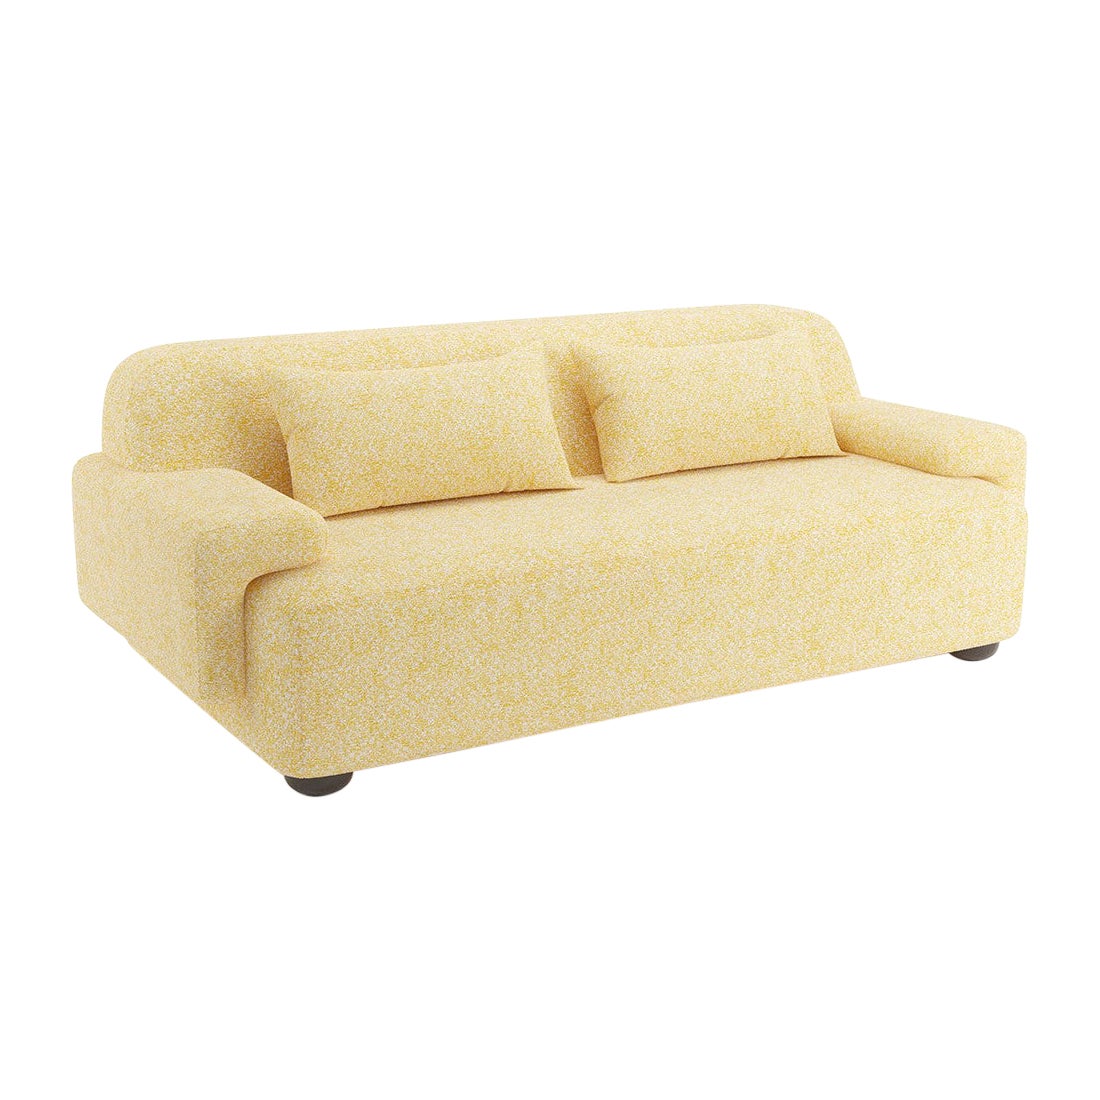 Popus Editions Lena 2.5 Seater Sofa in Straw Zanzi Linen with Wool Blend Fabric For Sale